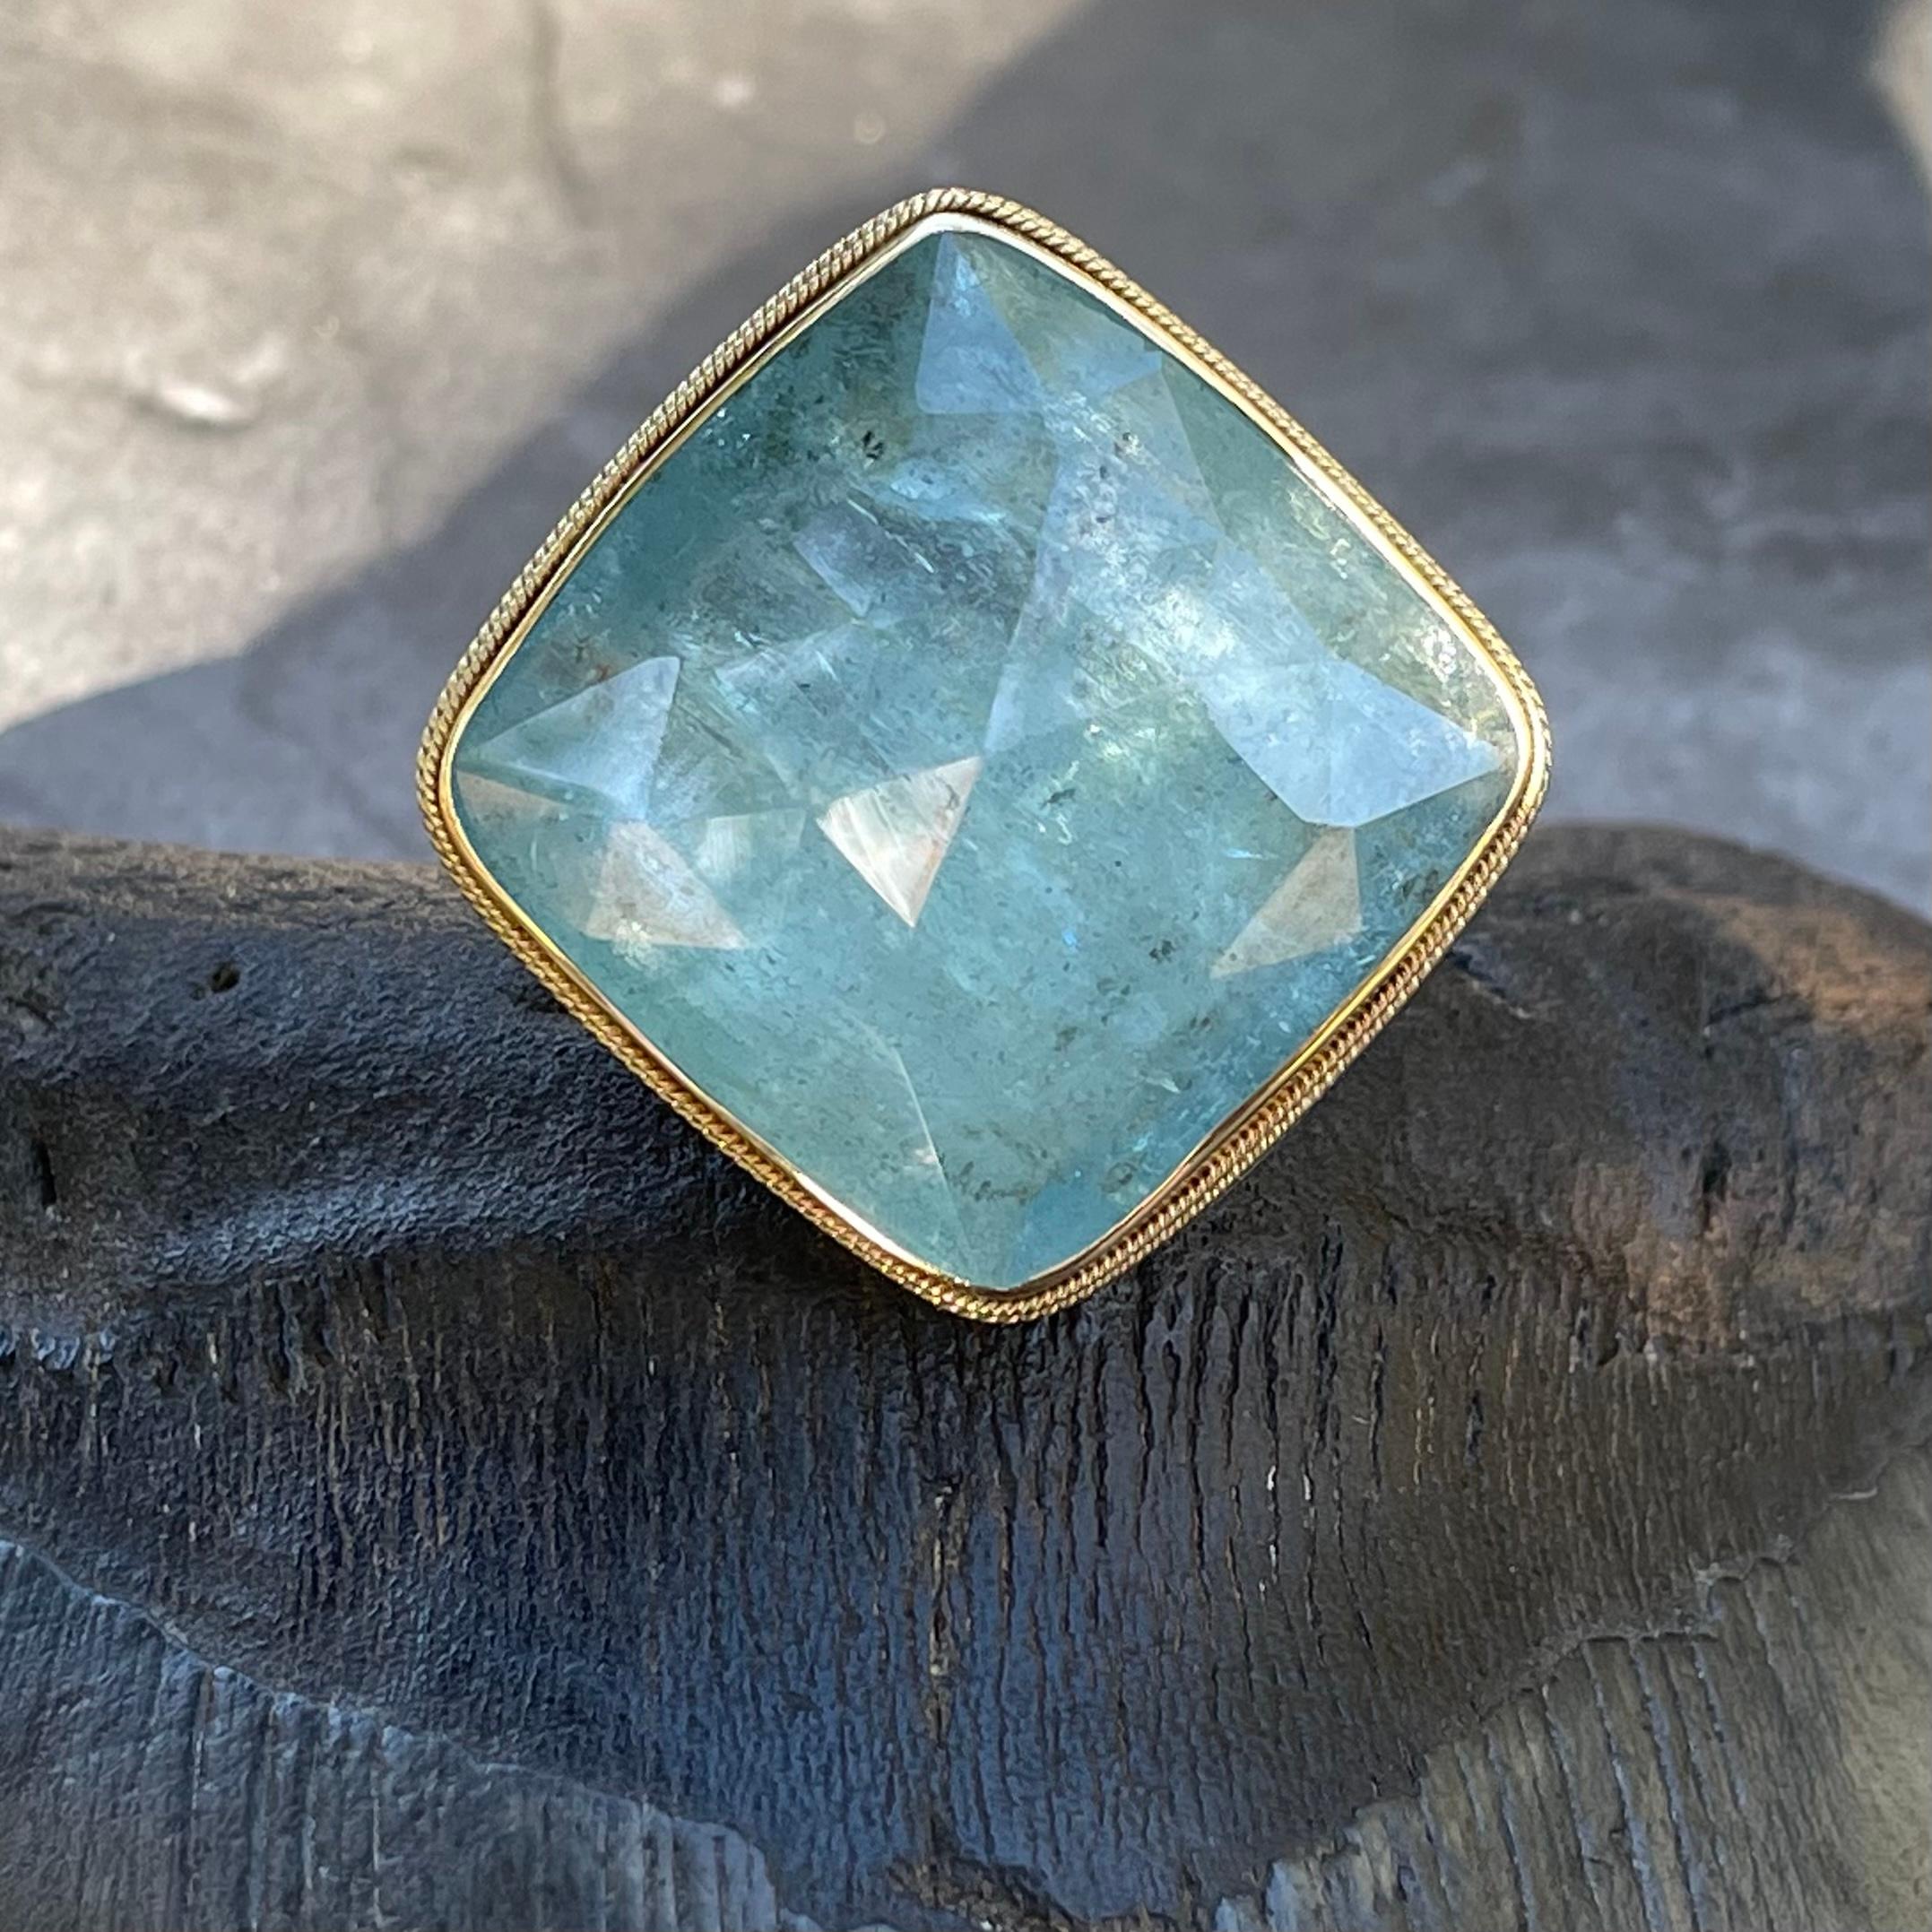 A large 27 mm x 27 mm light blue aquamarine cushion shaped faceted aquamarine is presented simply with an 18K gold bezel with double twist wire 18K accent in this Steven Battelle stunner. Mounted atop a sterling silver 